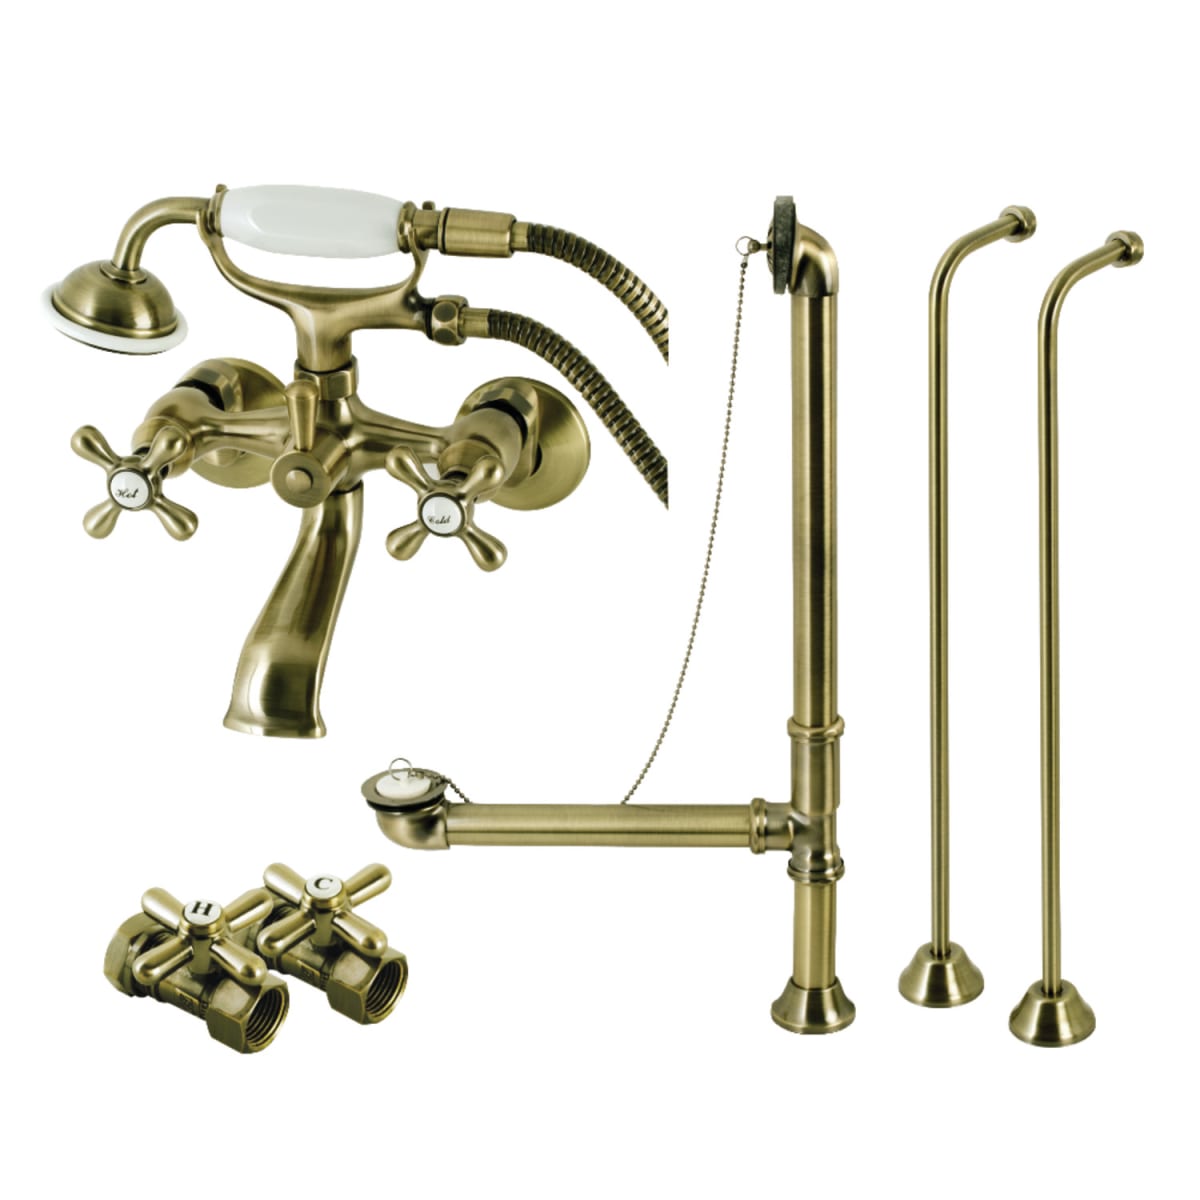 Oil Rubbed Bronze KINGSTON Brass CCK19T5A Vintage Wall Mount Down Spout Claw Foot Tub Faucet Package